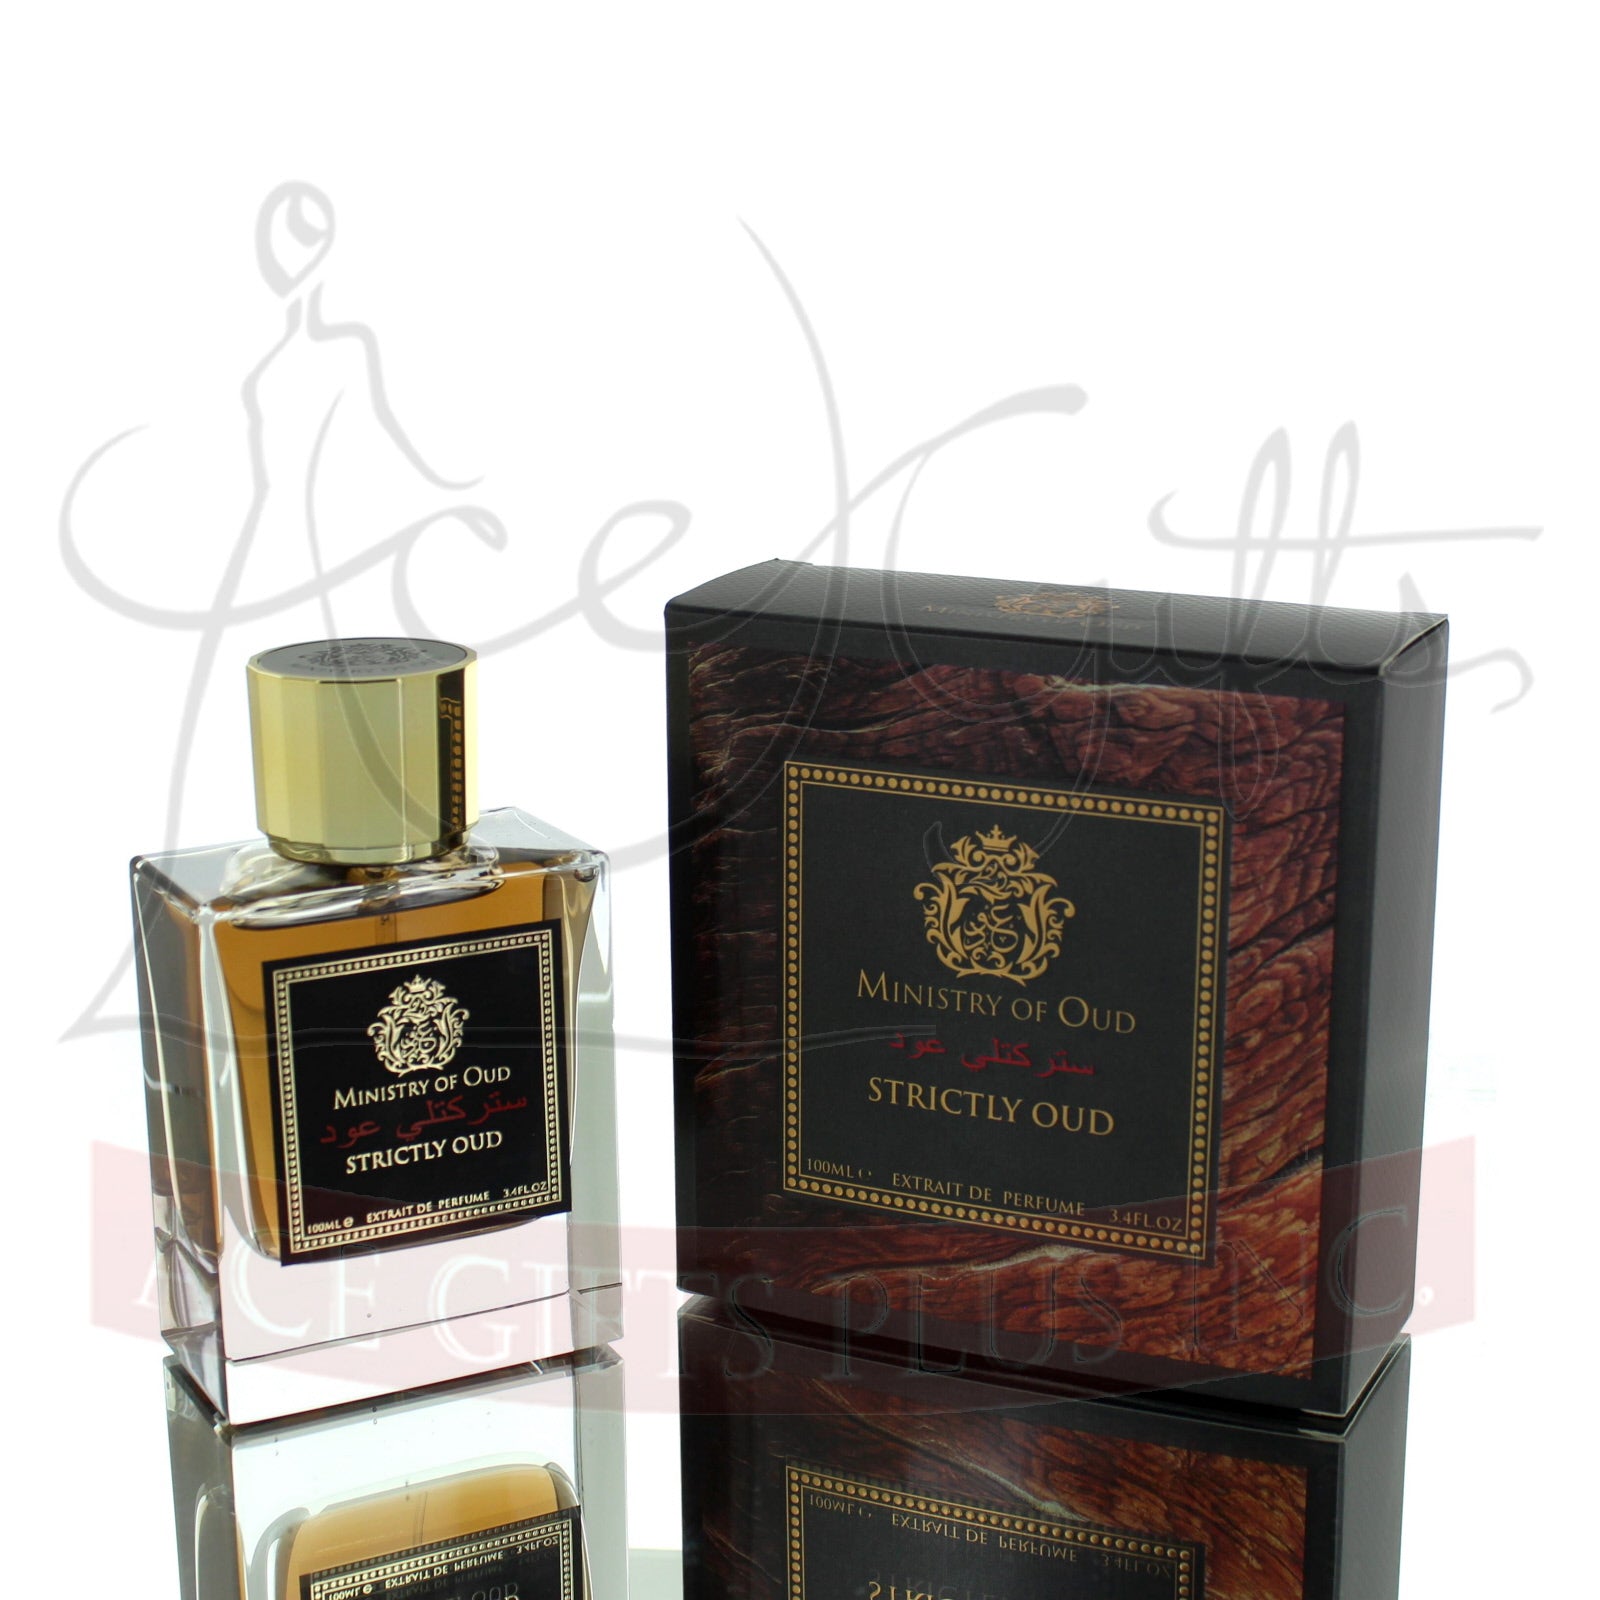 Ace Gifts Plus — Buy Ministry Of Oud Strictly Oud Perfume